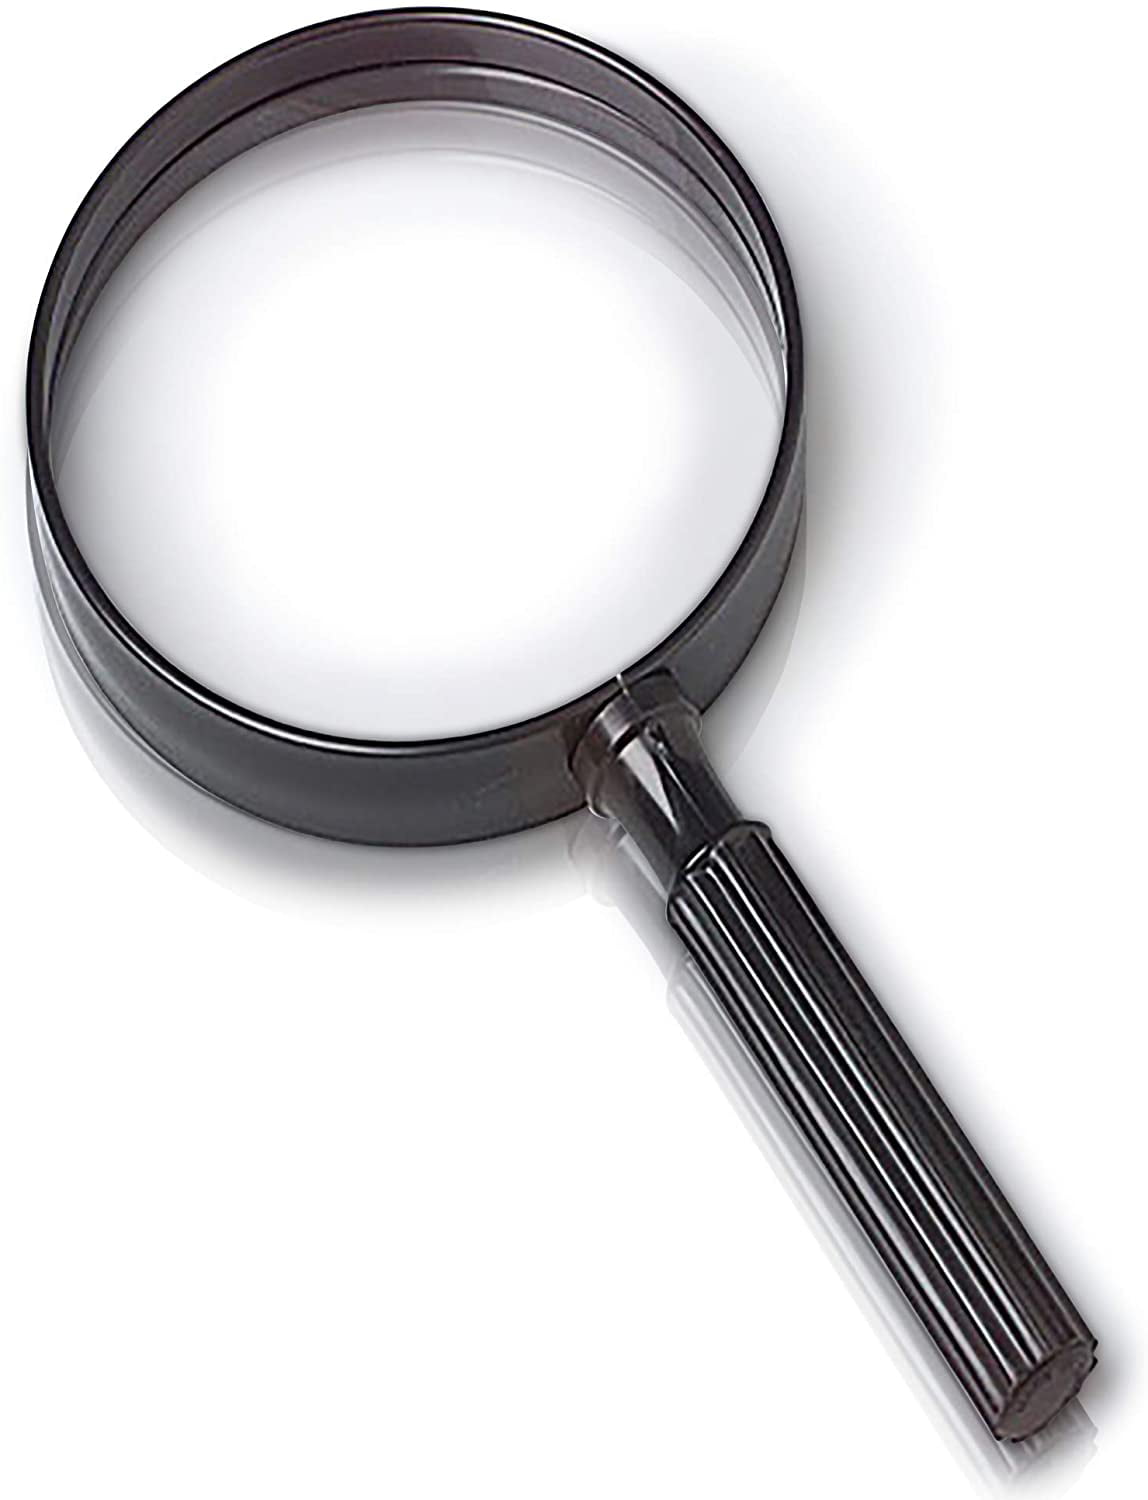 1PC Kids Jumbo Magnifying Glass Learning Resources Educational Toy Elegant GoldY